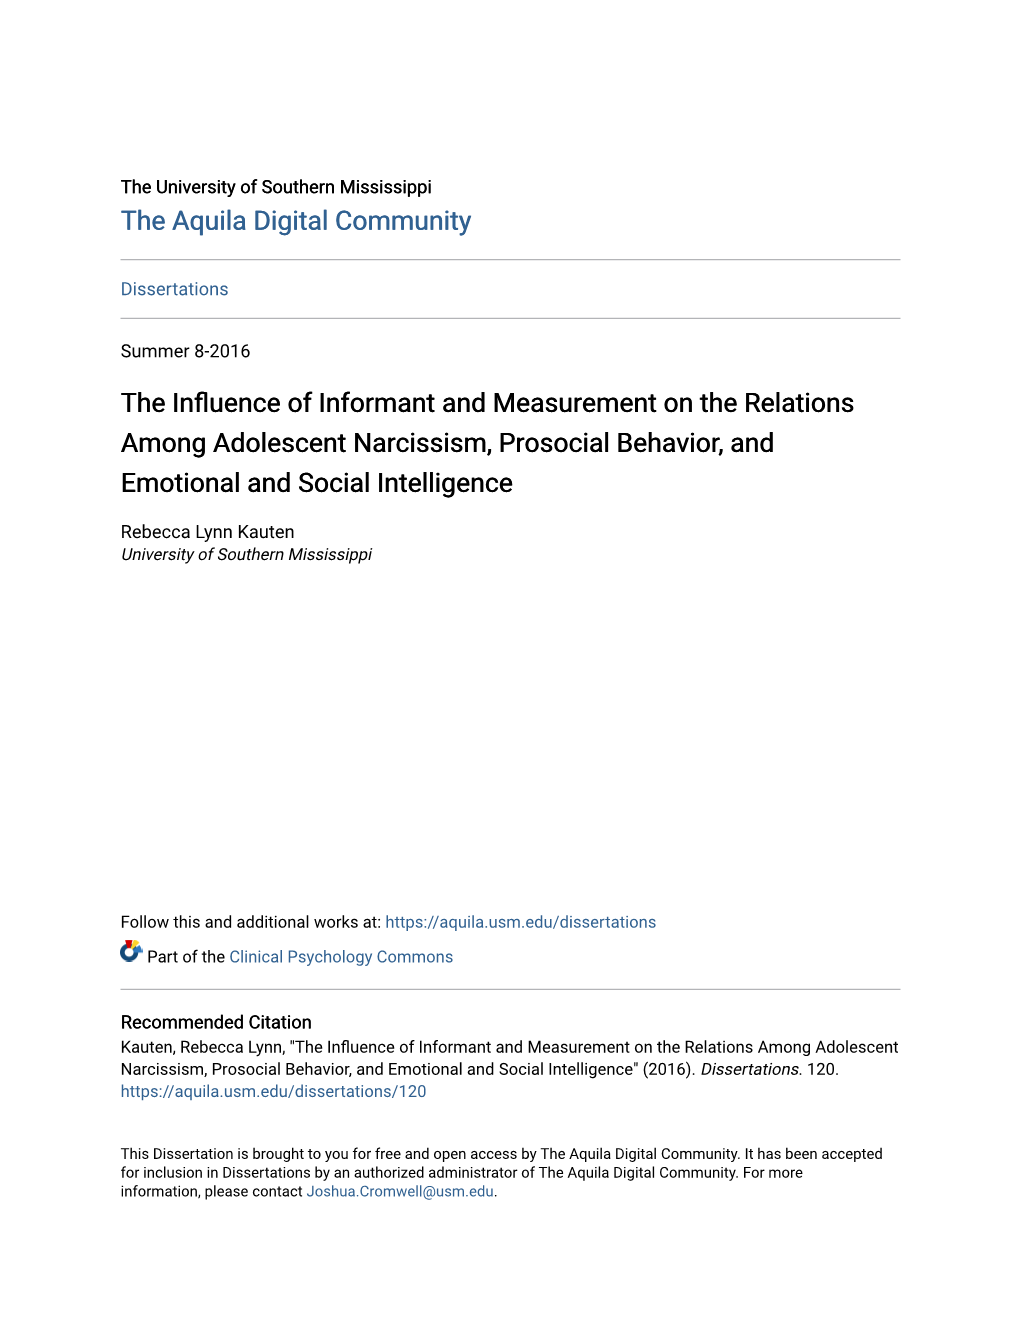 The Influence of Informant and Measurement on the Relations Among Adolescent Narcissism, Prosocial Behavior, and Emotional and Social Intelligence